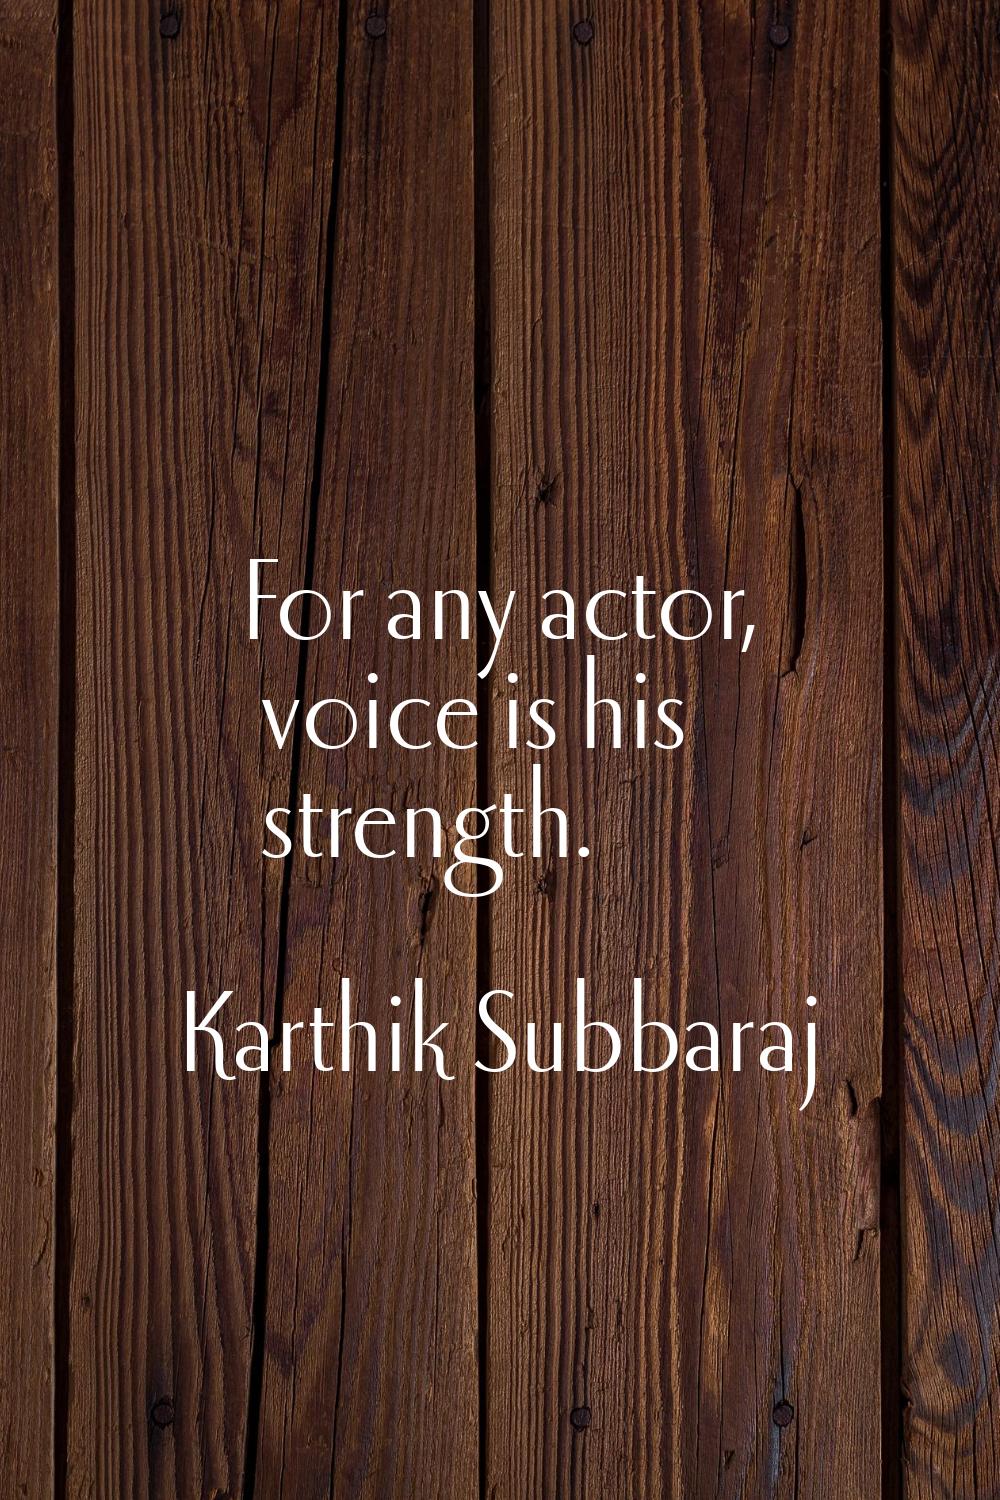 For any actor, voice is his strength.